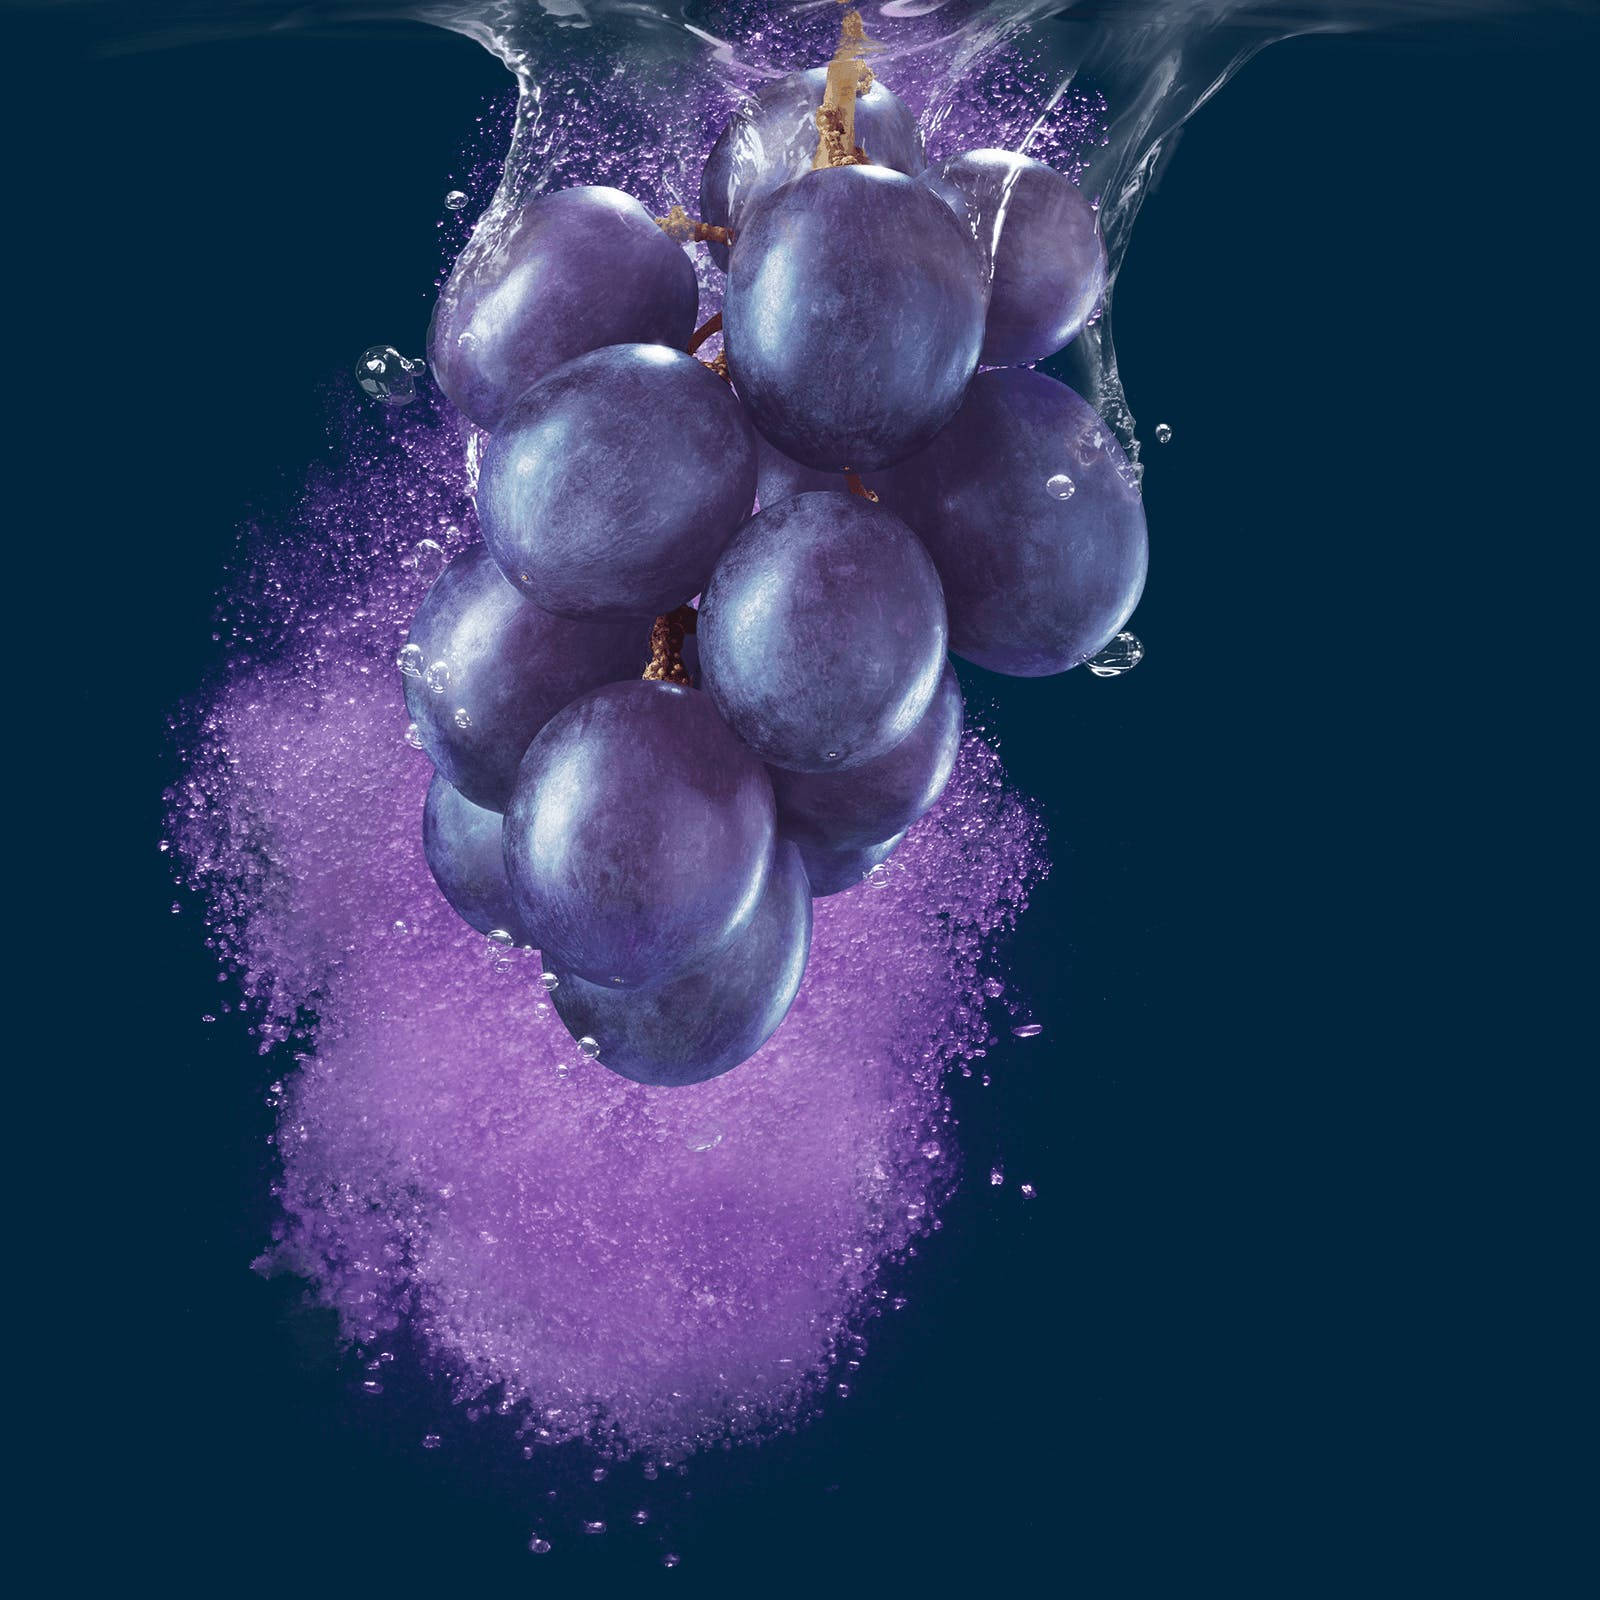 Fresh Grapes Soaked In Water